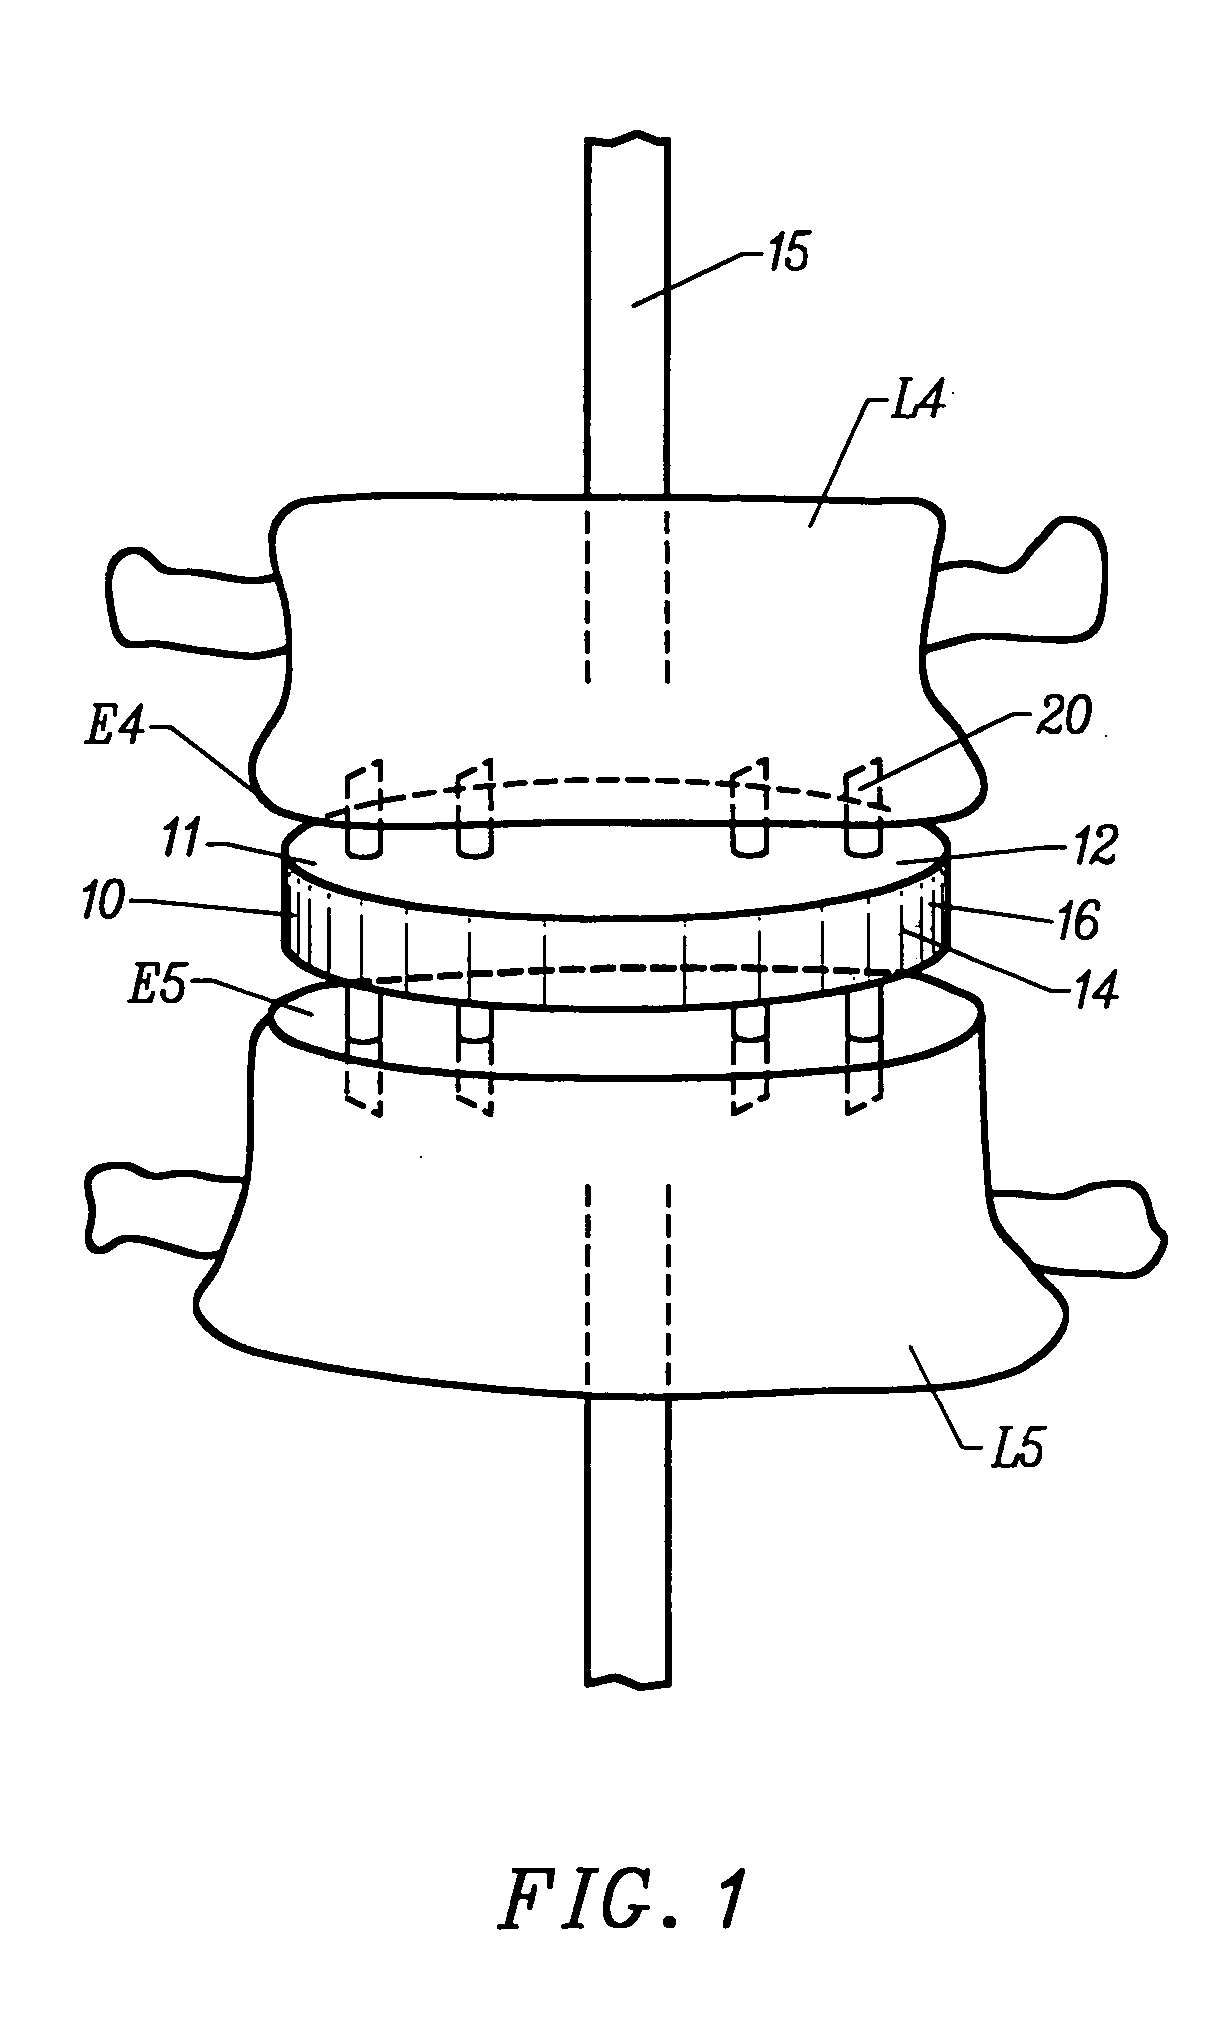 Method and apparatus for intervertebral implant anchorage